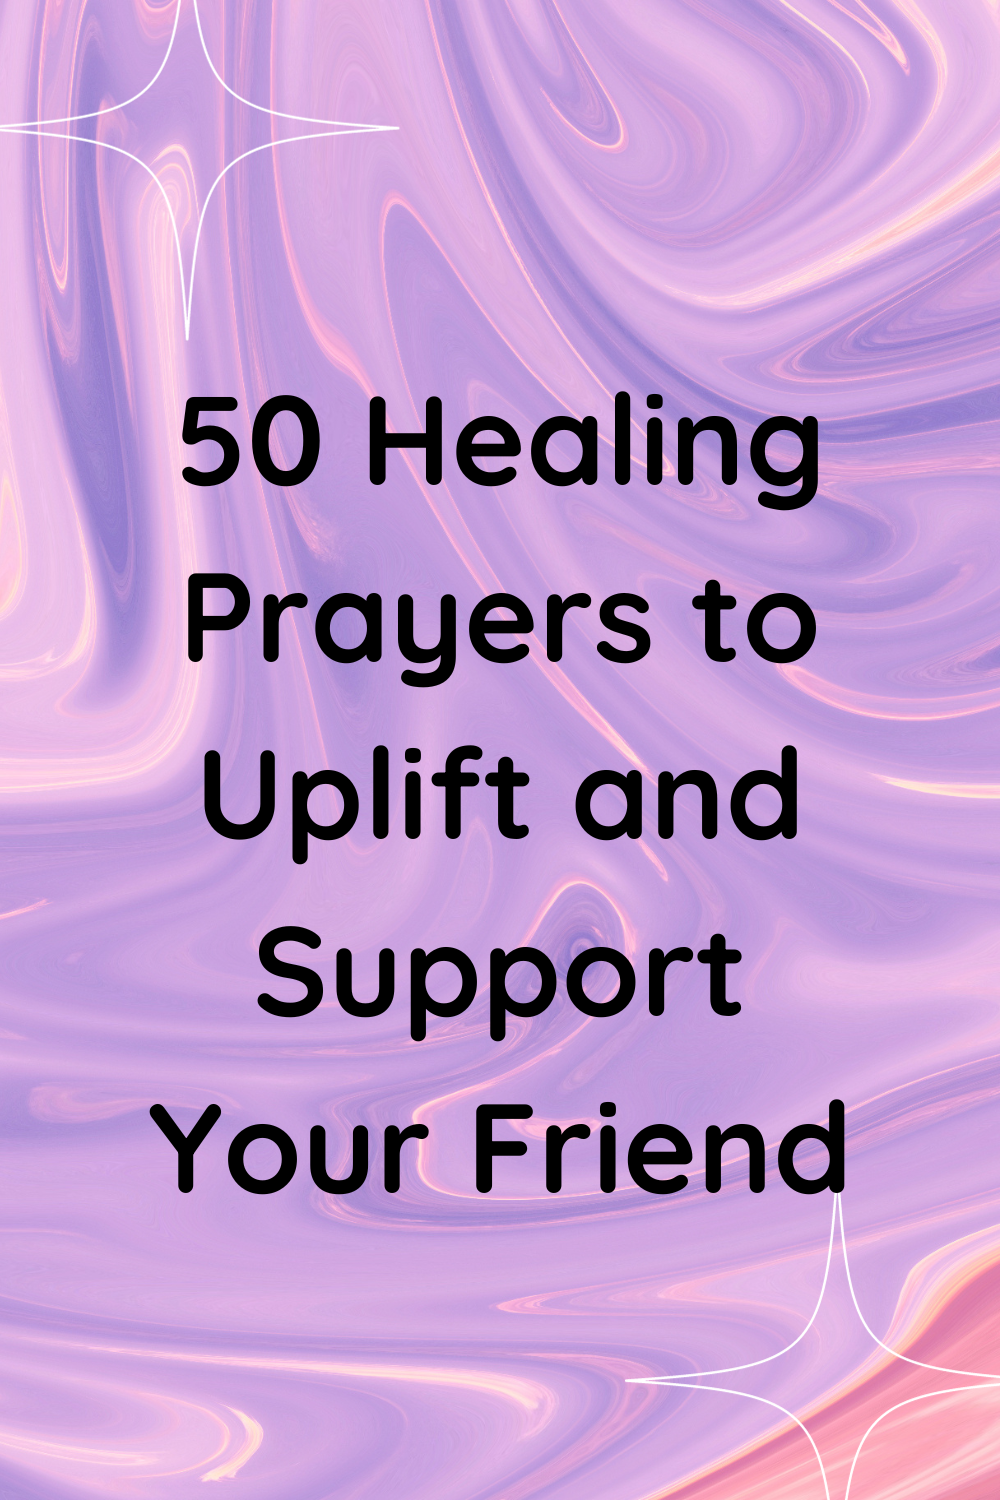 Christian Prayers for Healing Images for Strength, Sick, Friend, Quotes, Peace, After Surgery